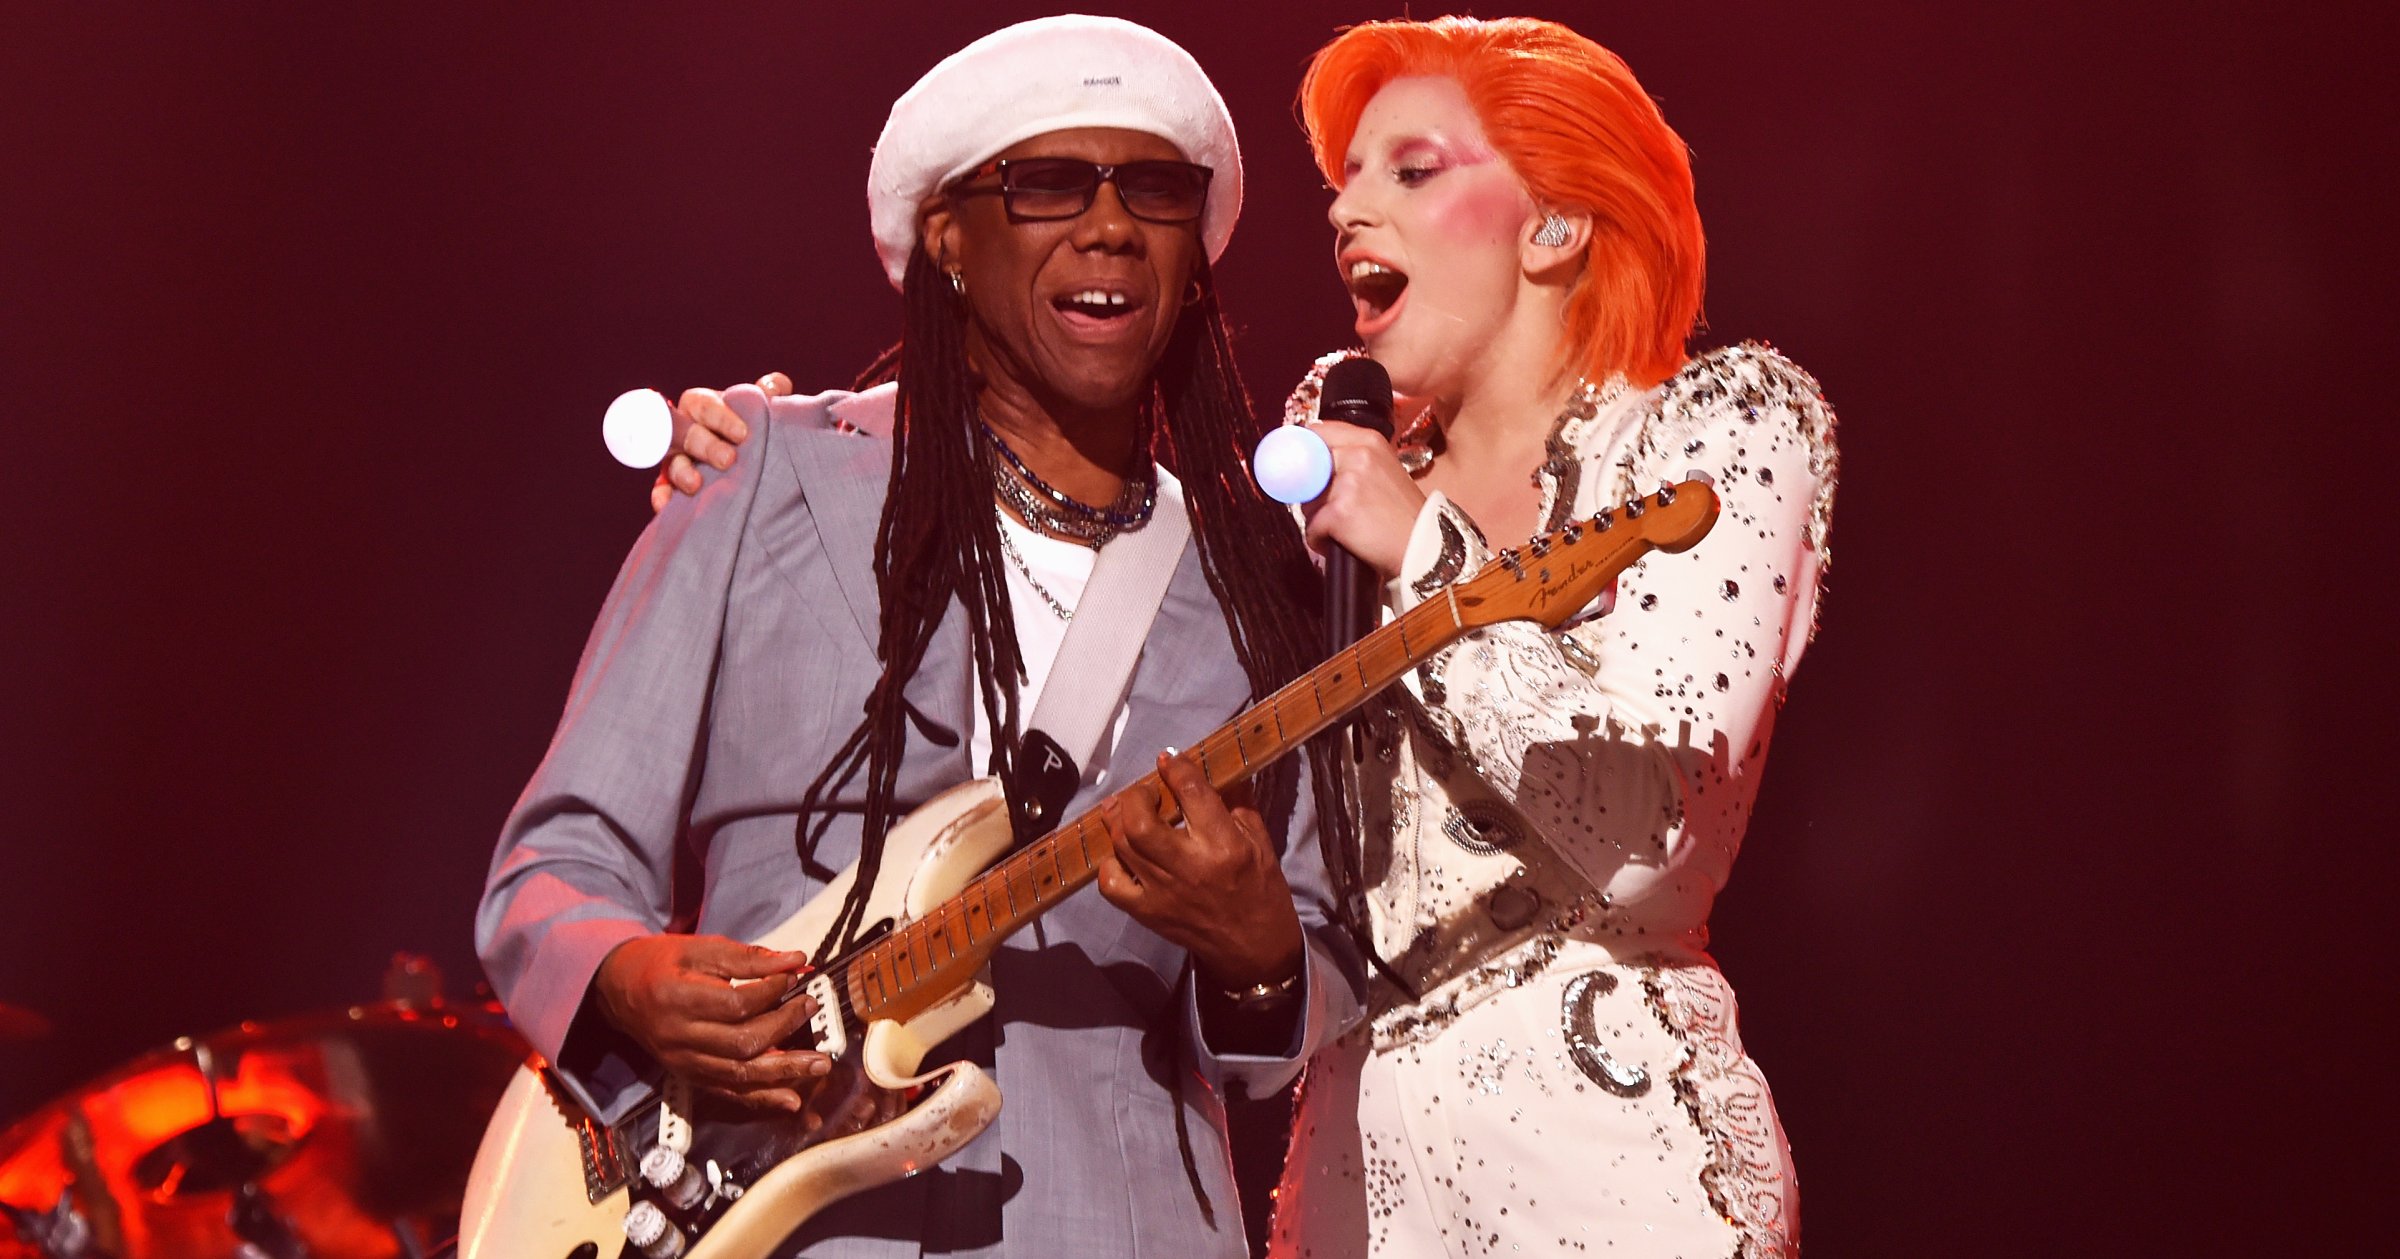 Nile Rodgers, left, and Lady Gaga, right, perform during the 58th GRAMMY Awards on Feb. 15, 2016 in Los Angeles.